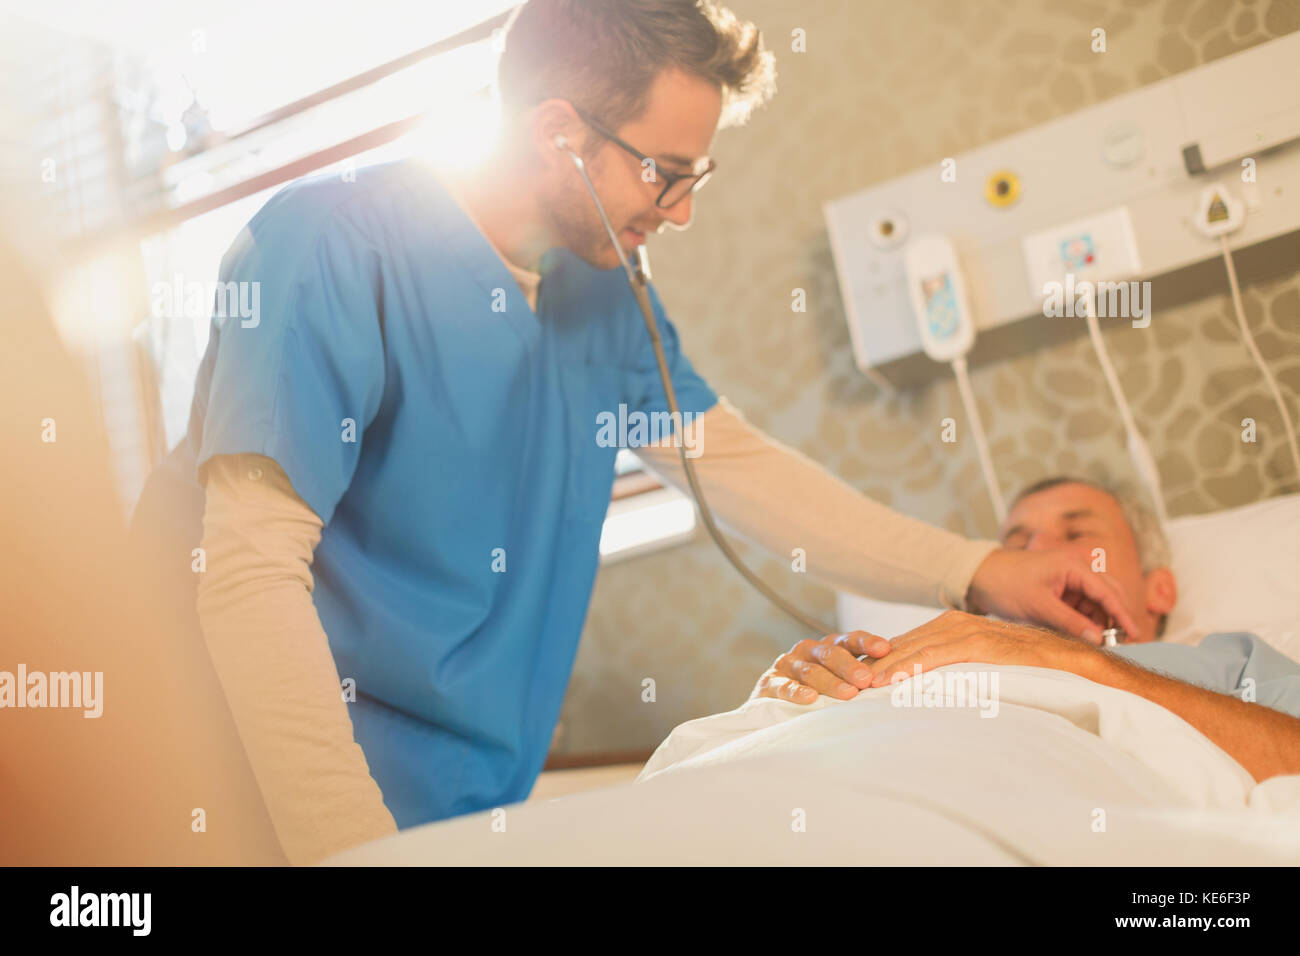 Male nurse using stethoscope on patient in hospital bed Stock Photo